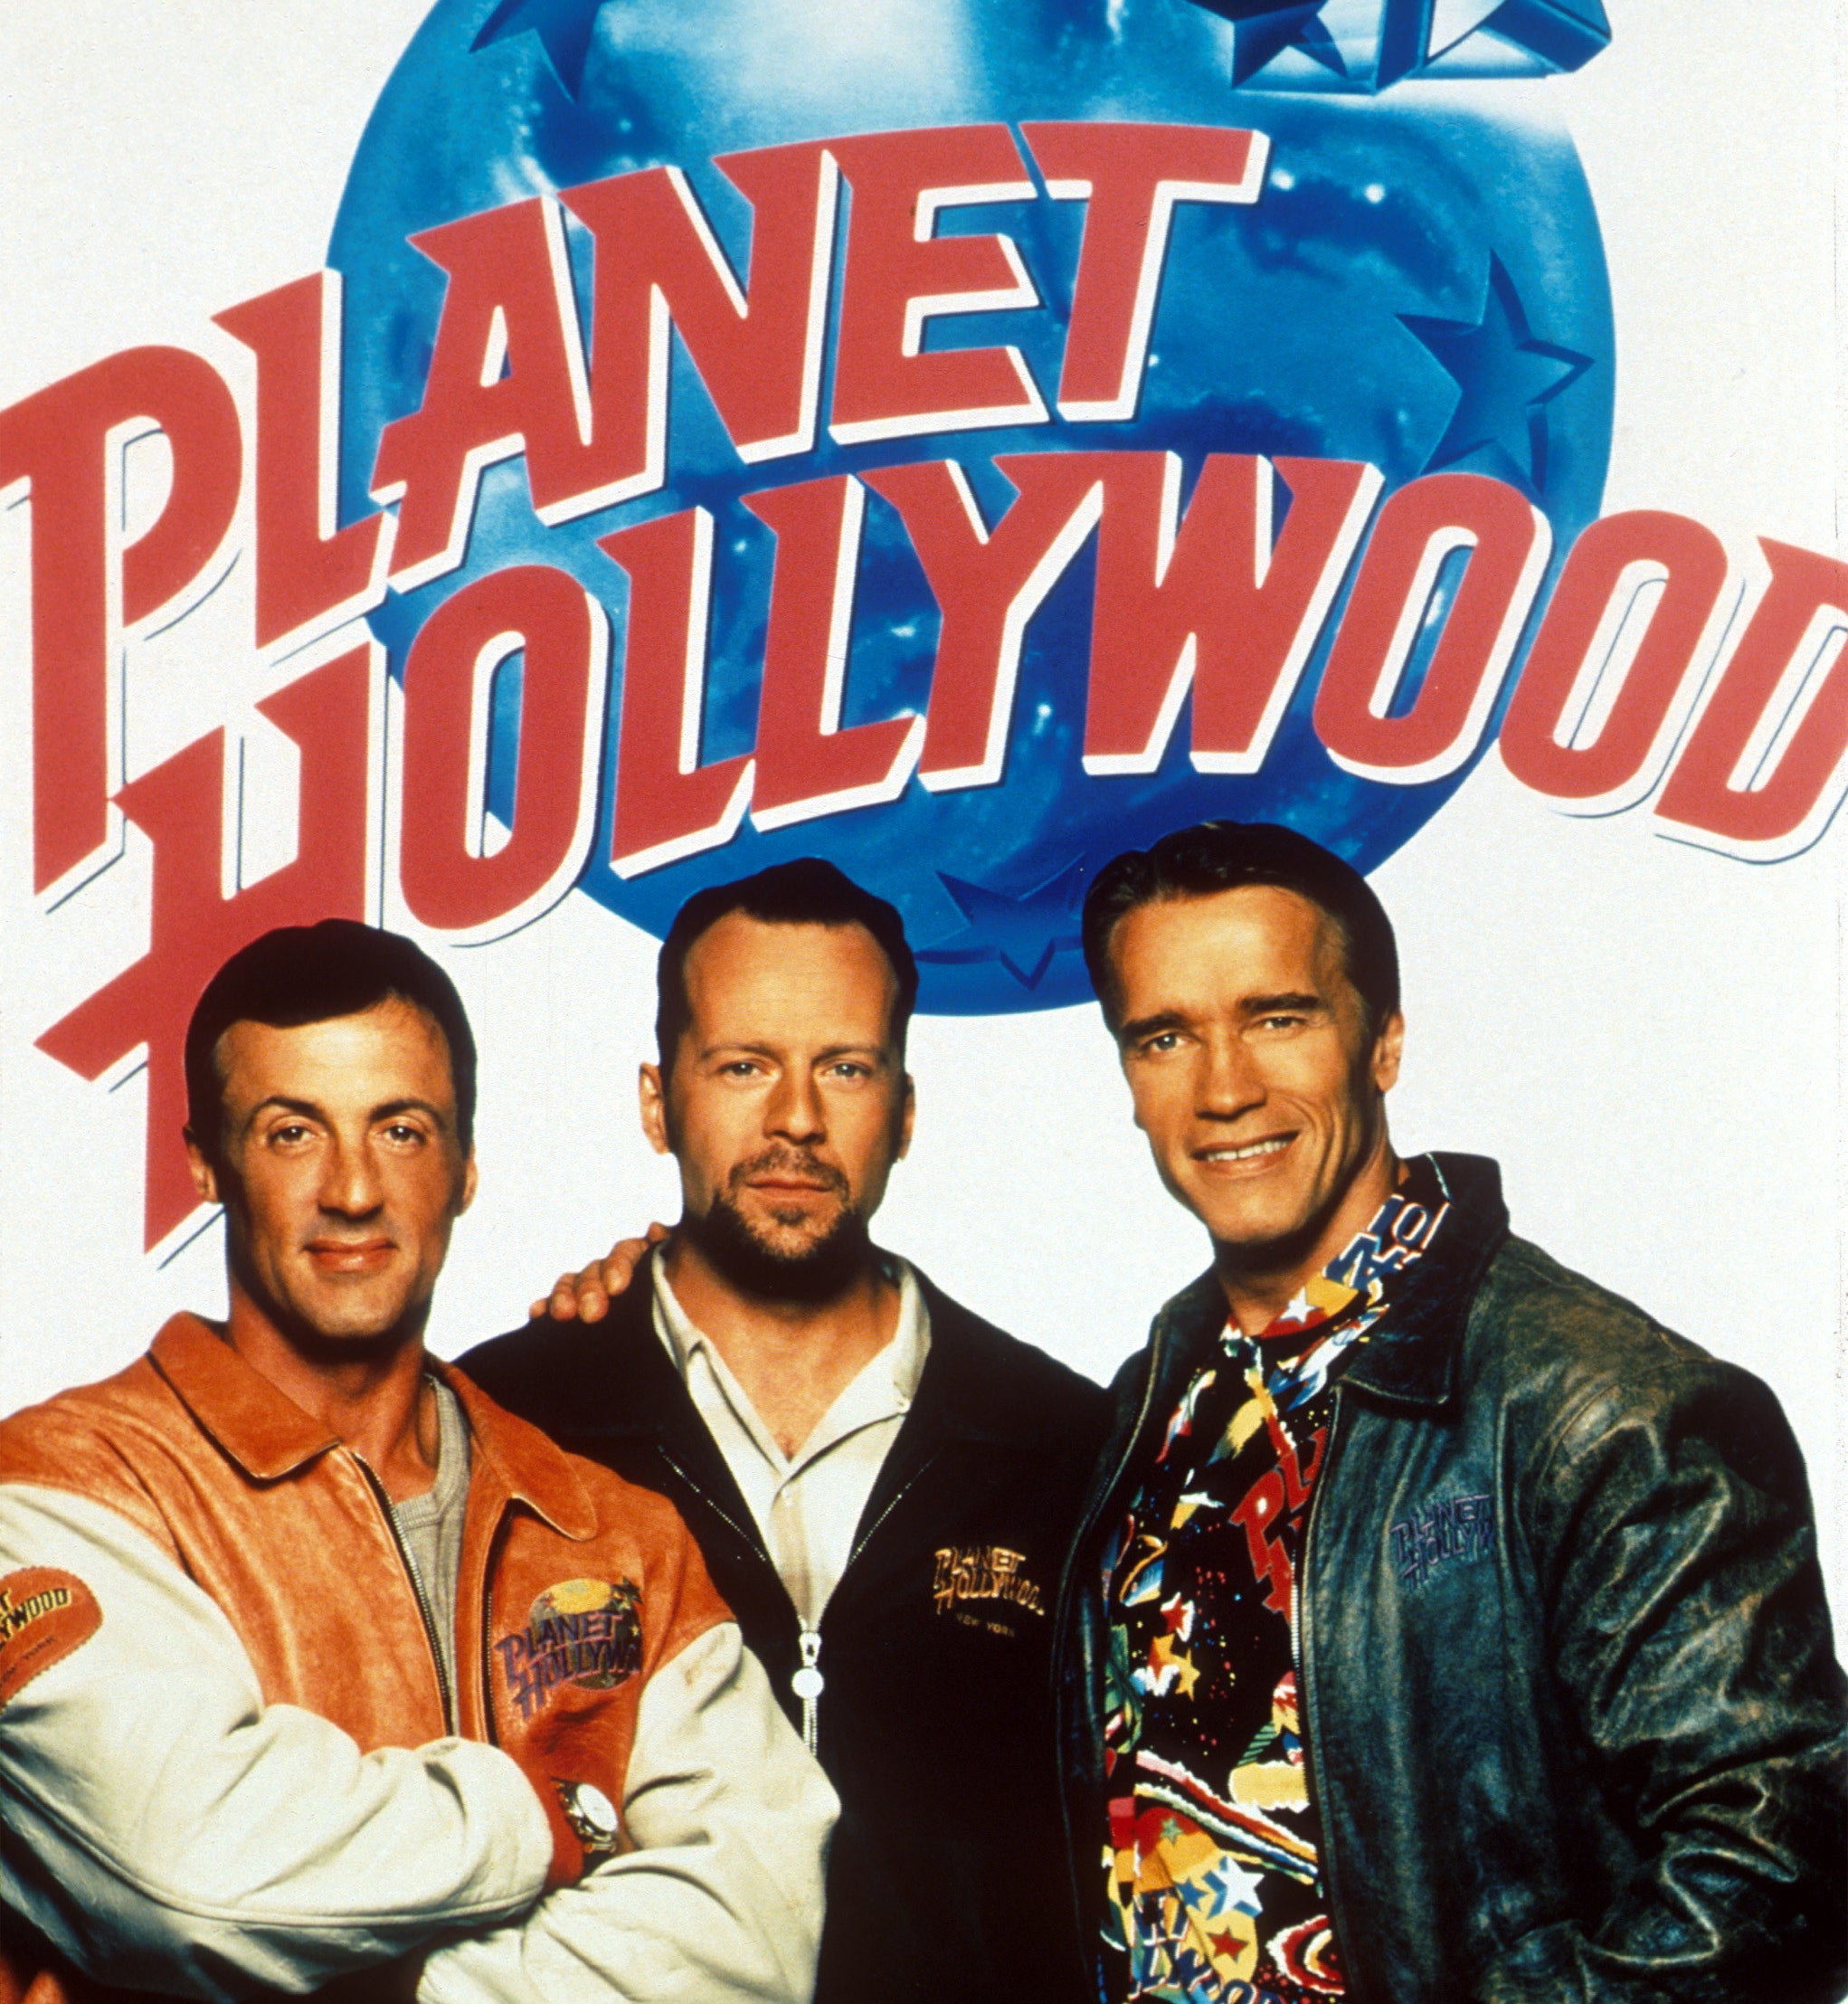 A poster for Planet Hollywood featuring Sylvester Stallone, Bruce Willis, and Arnold Schwarzenegger